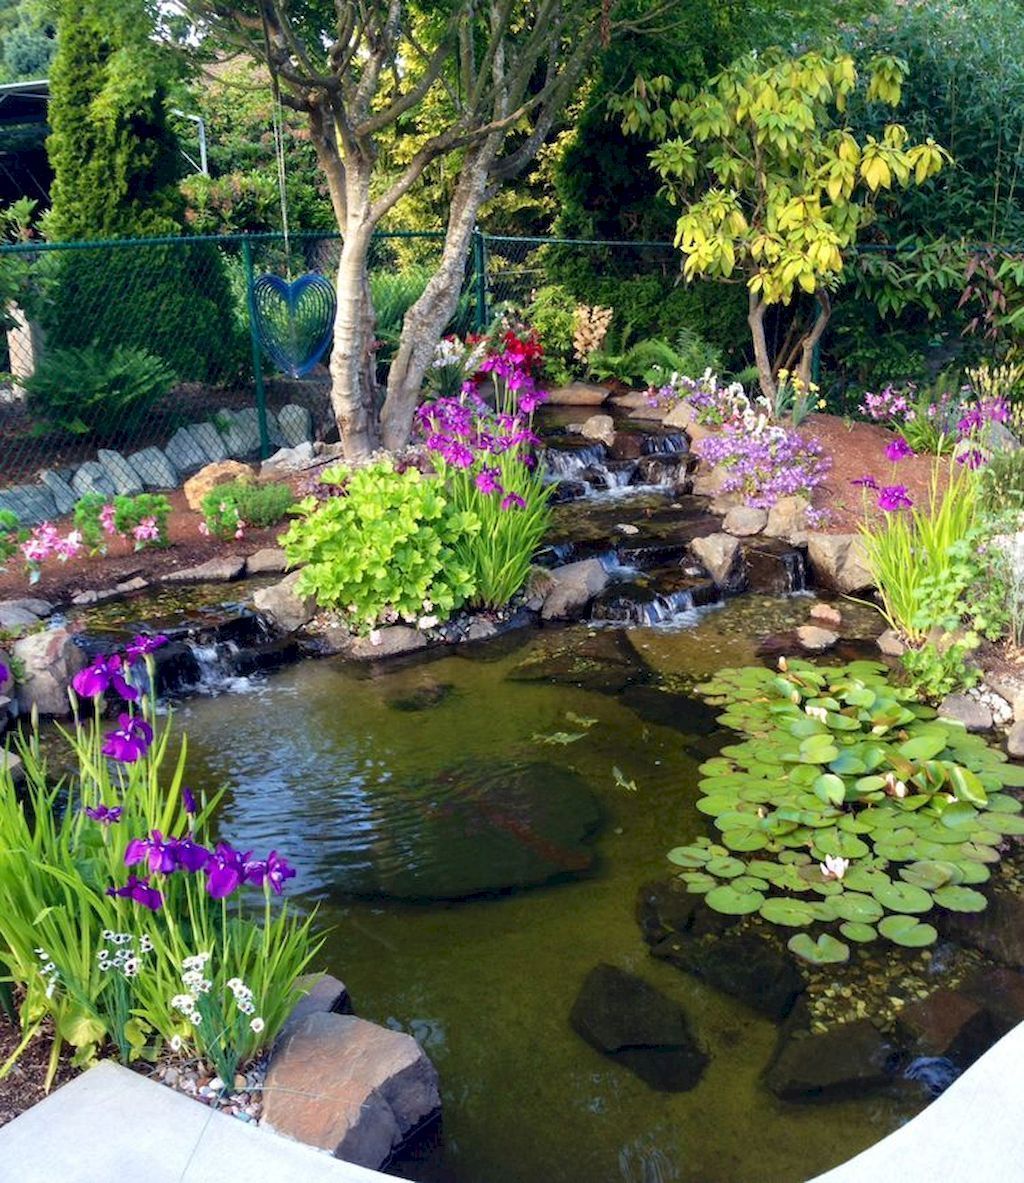 6 Reasons Why You Should Build a Pond